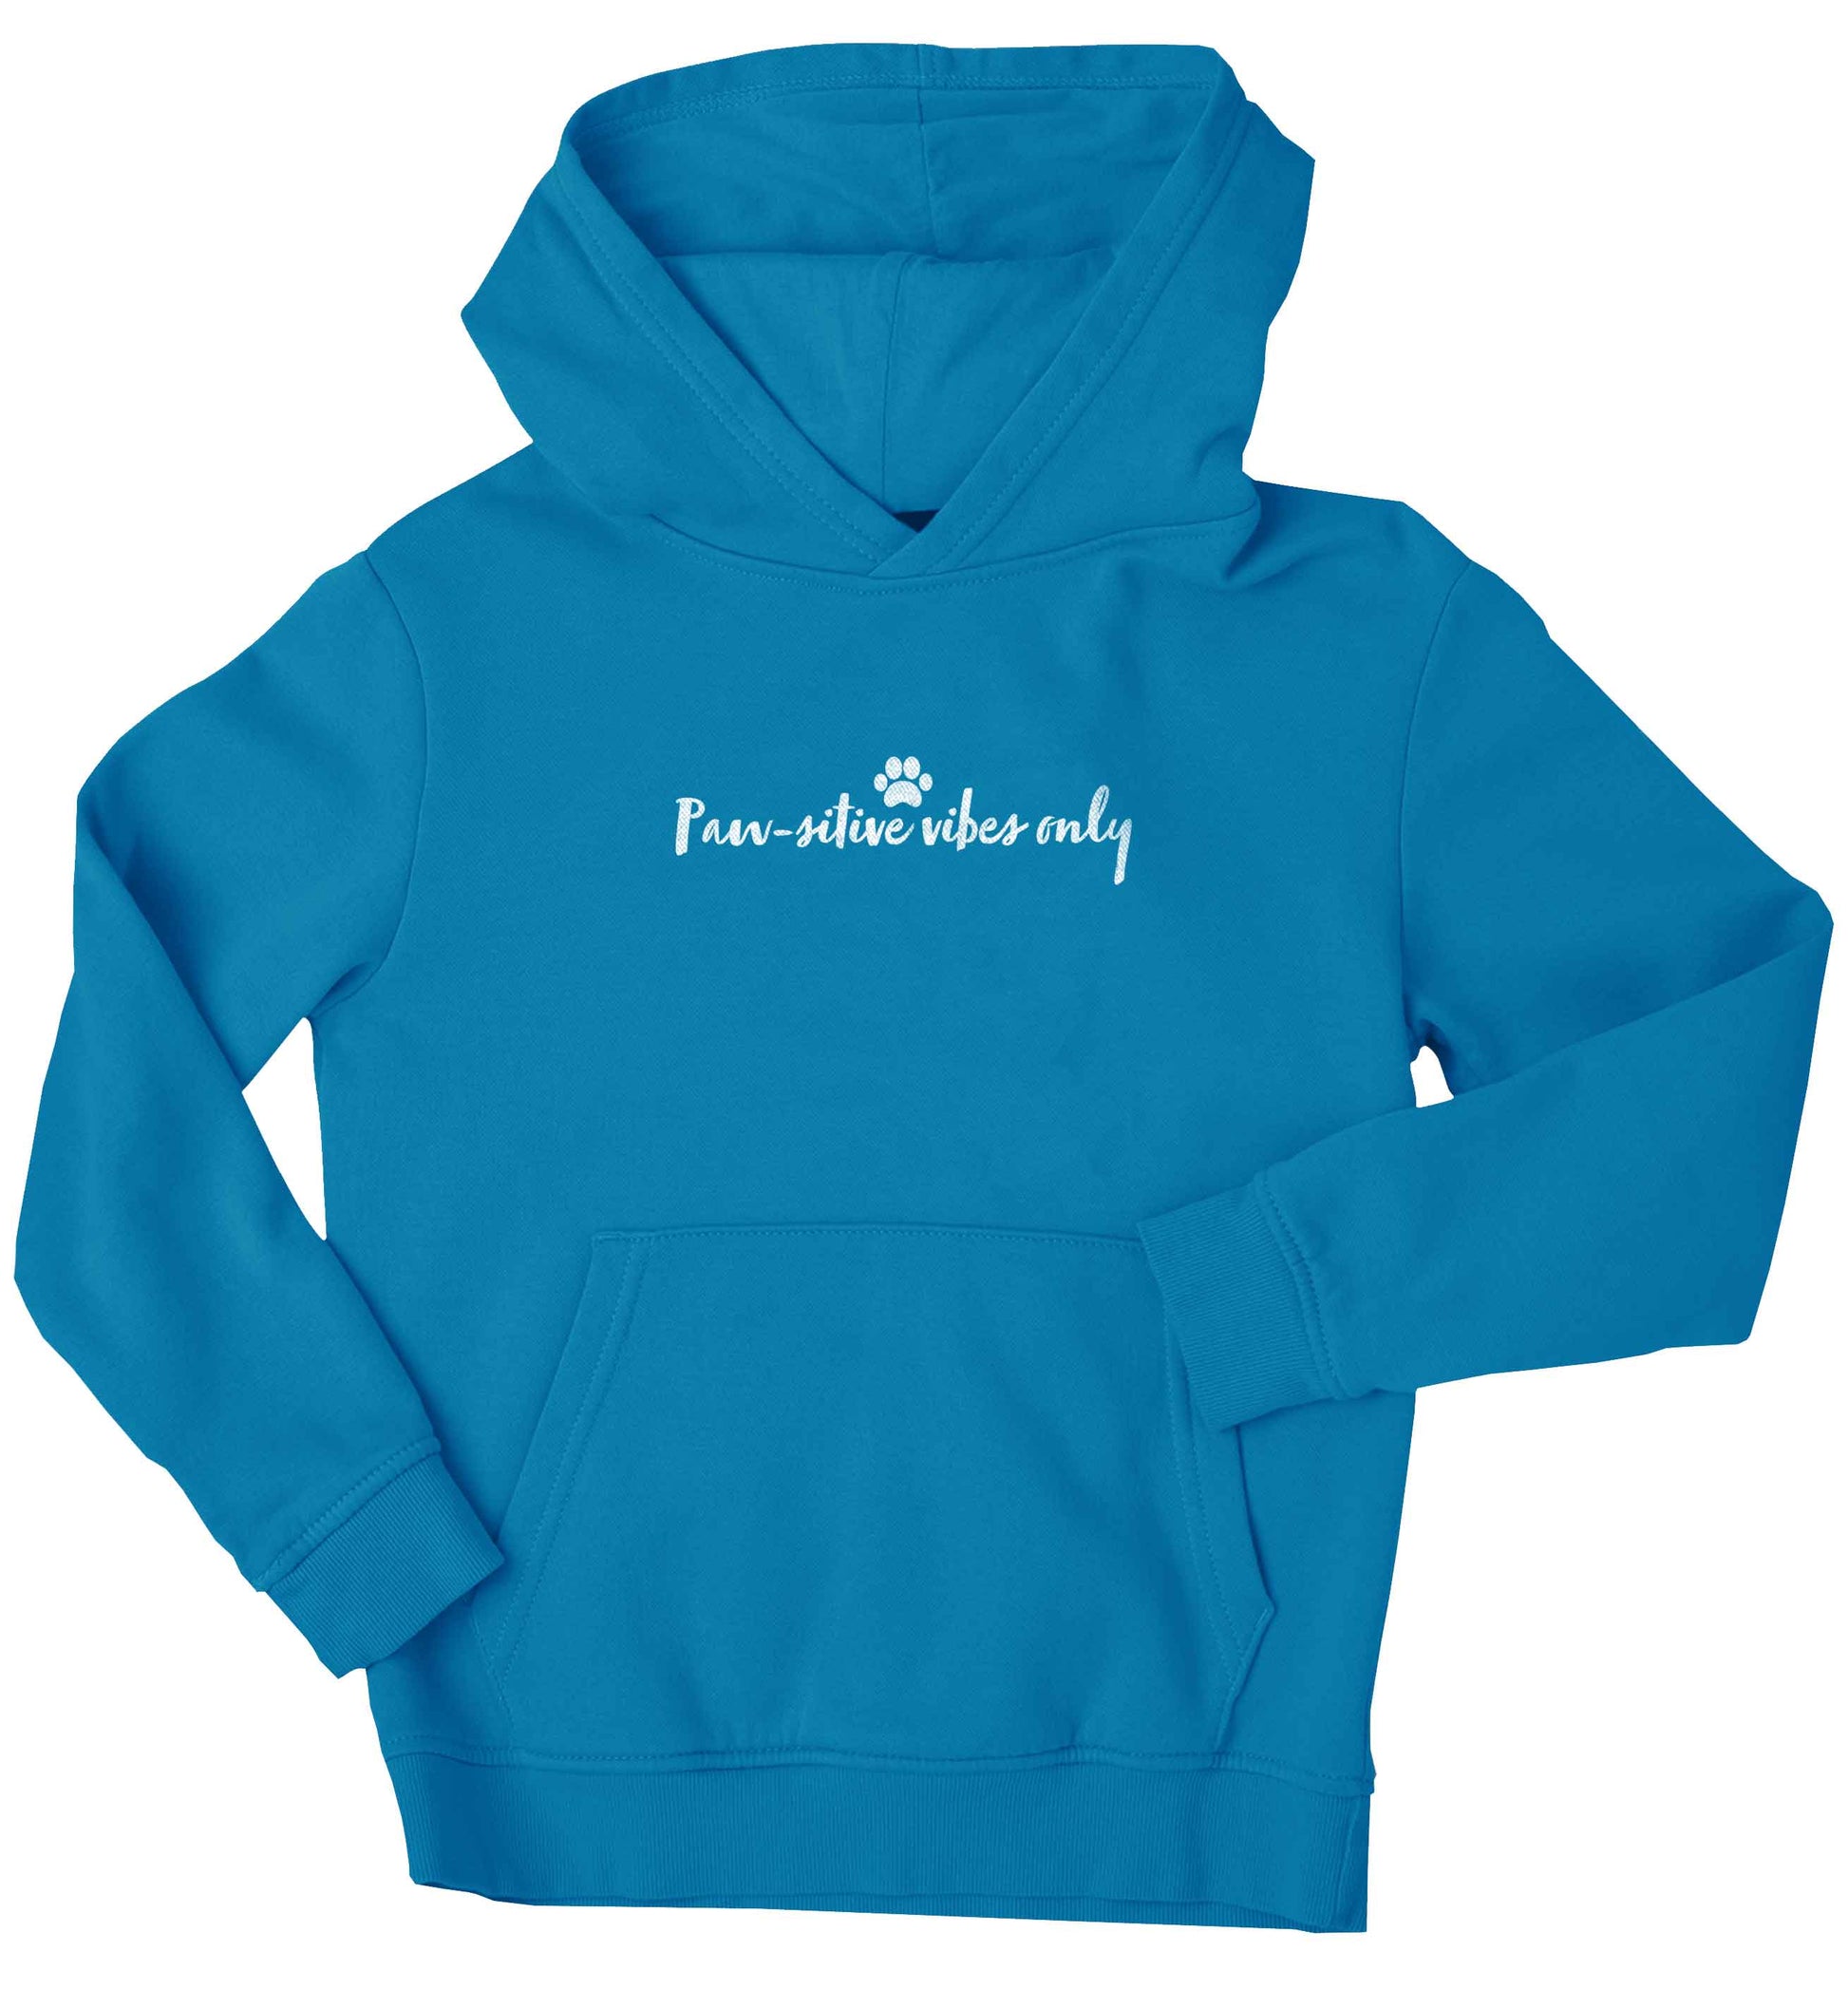 Pawsitive vibes only Kit children's blue hoodie 12-13 Years